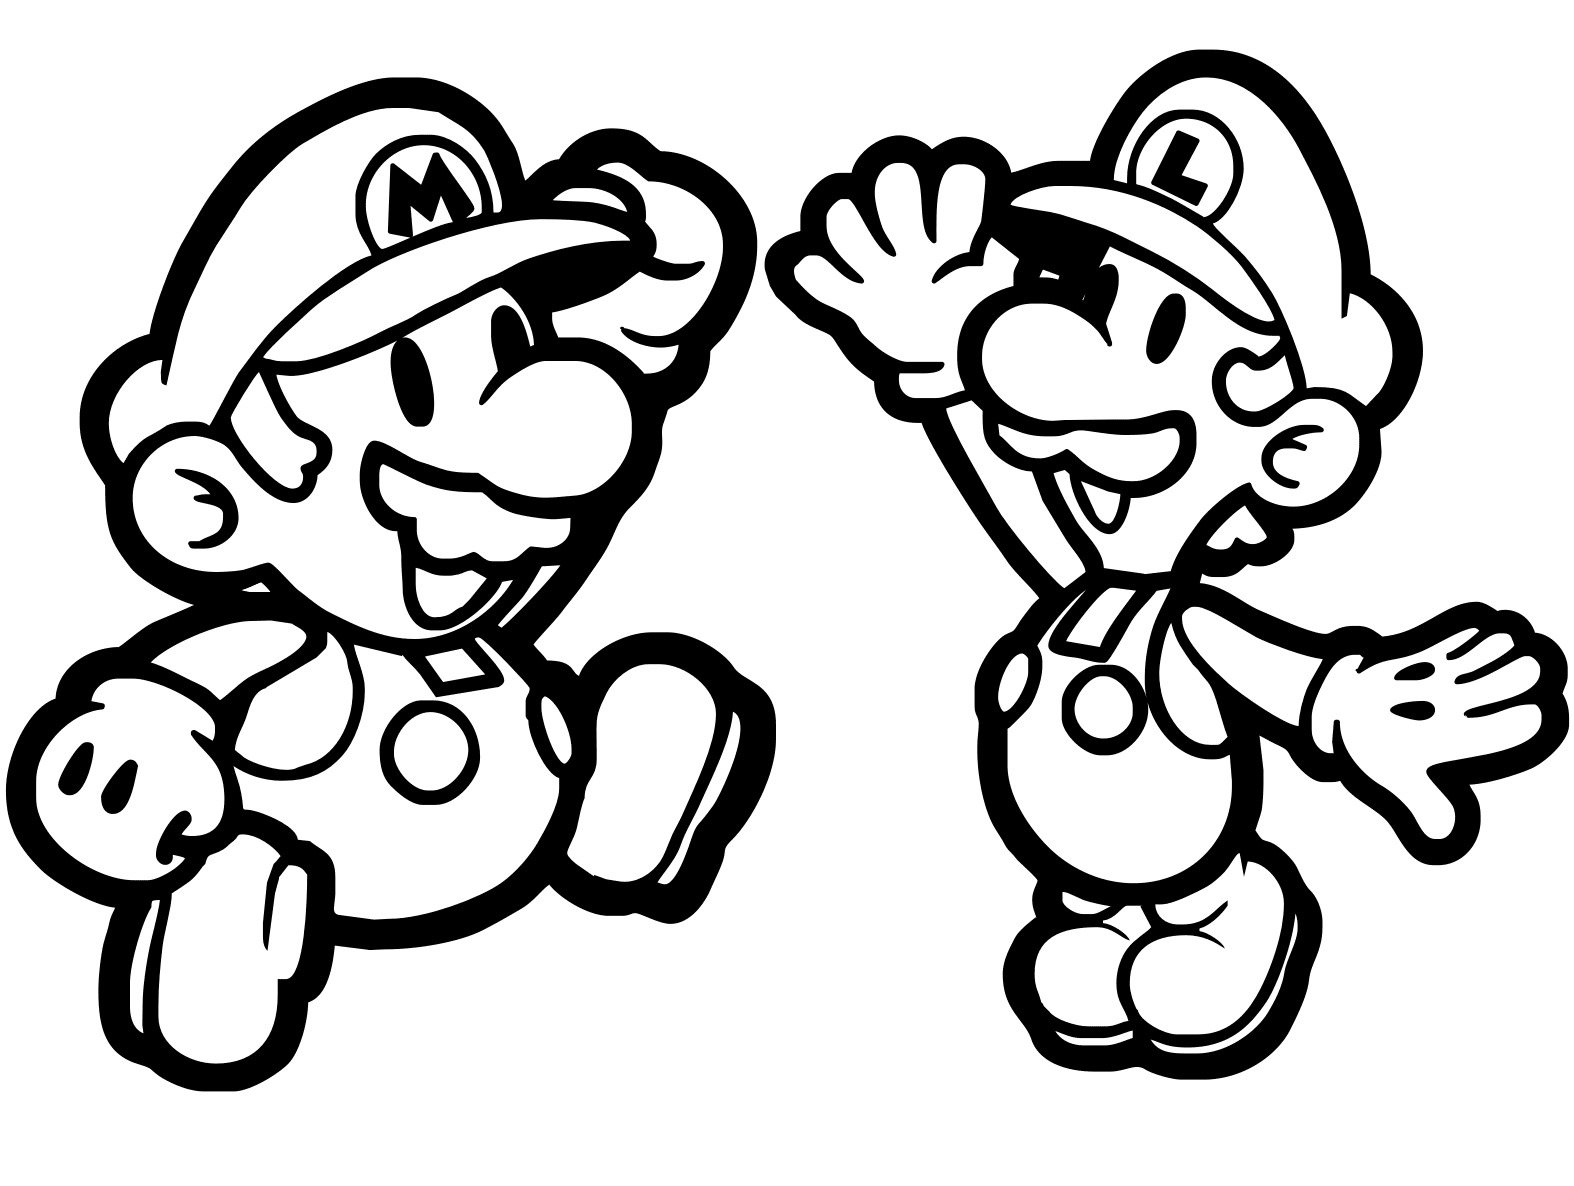 Chibi Mario and Luigi high-five Coloring Pages